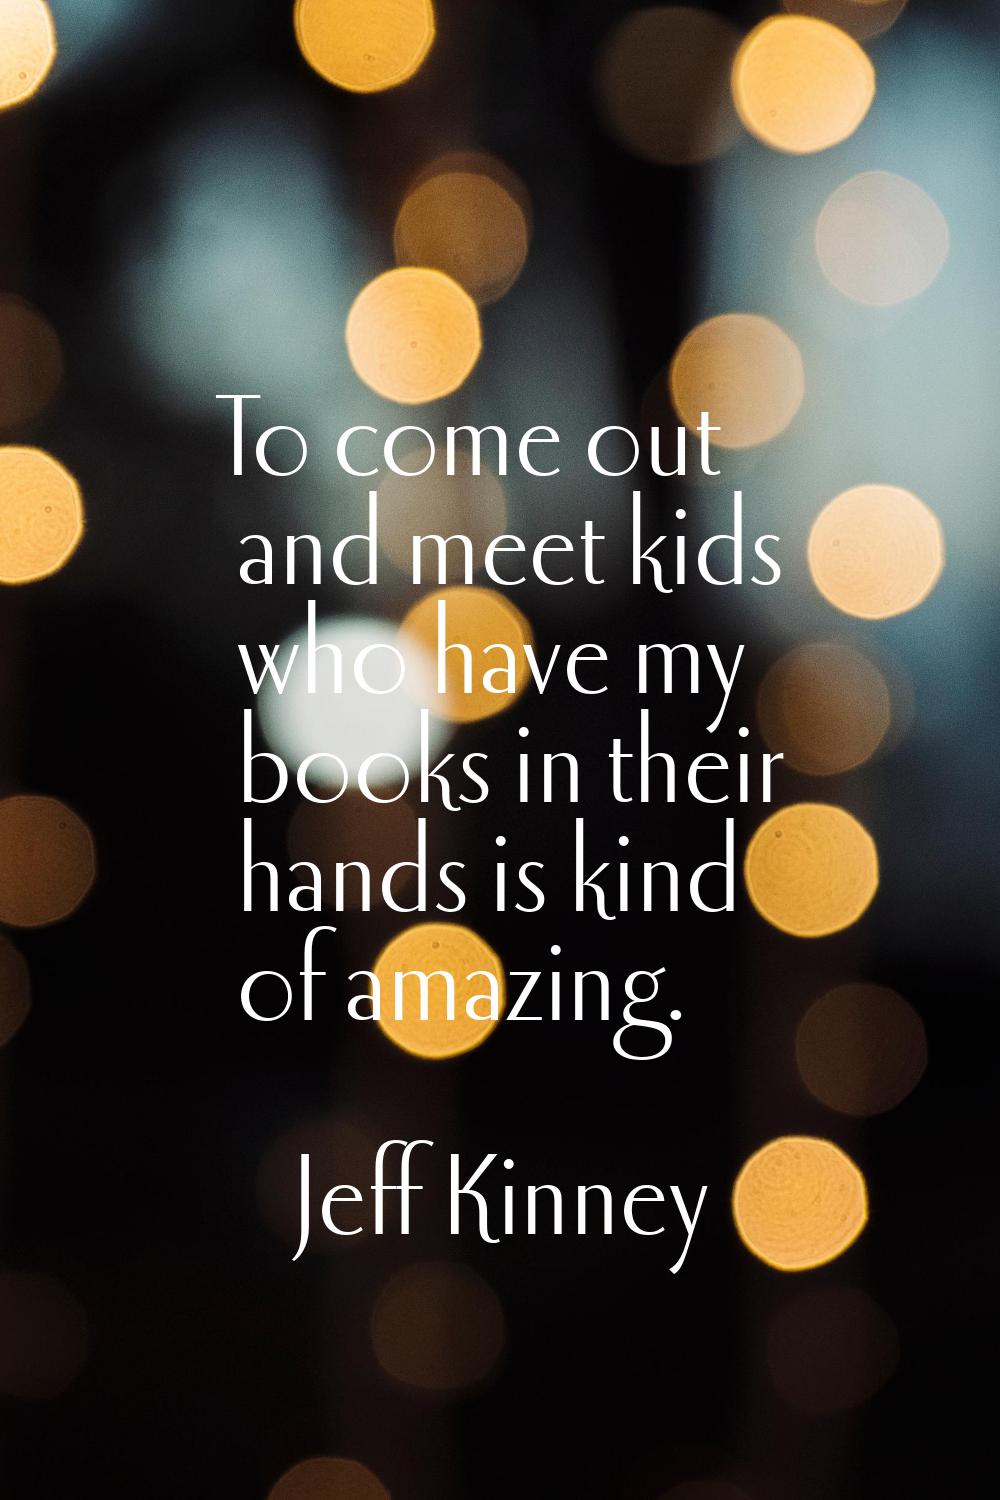 To come out and meet kids who have my books in their hands is kind of amazing.